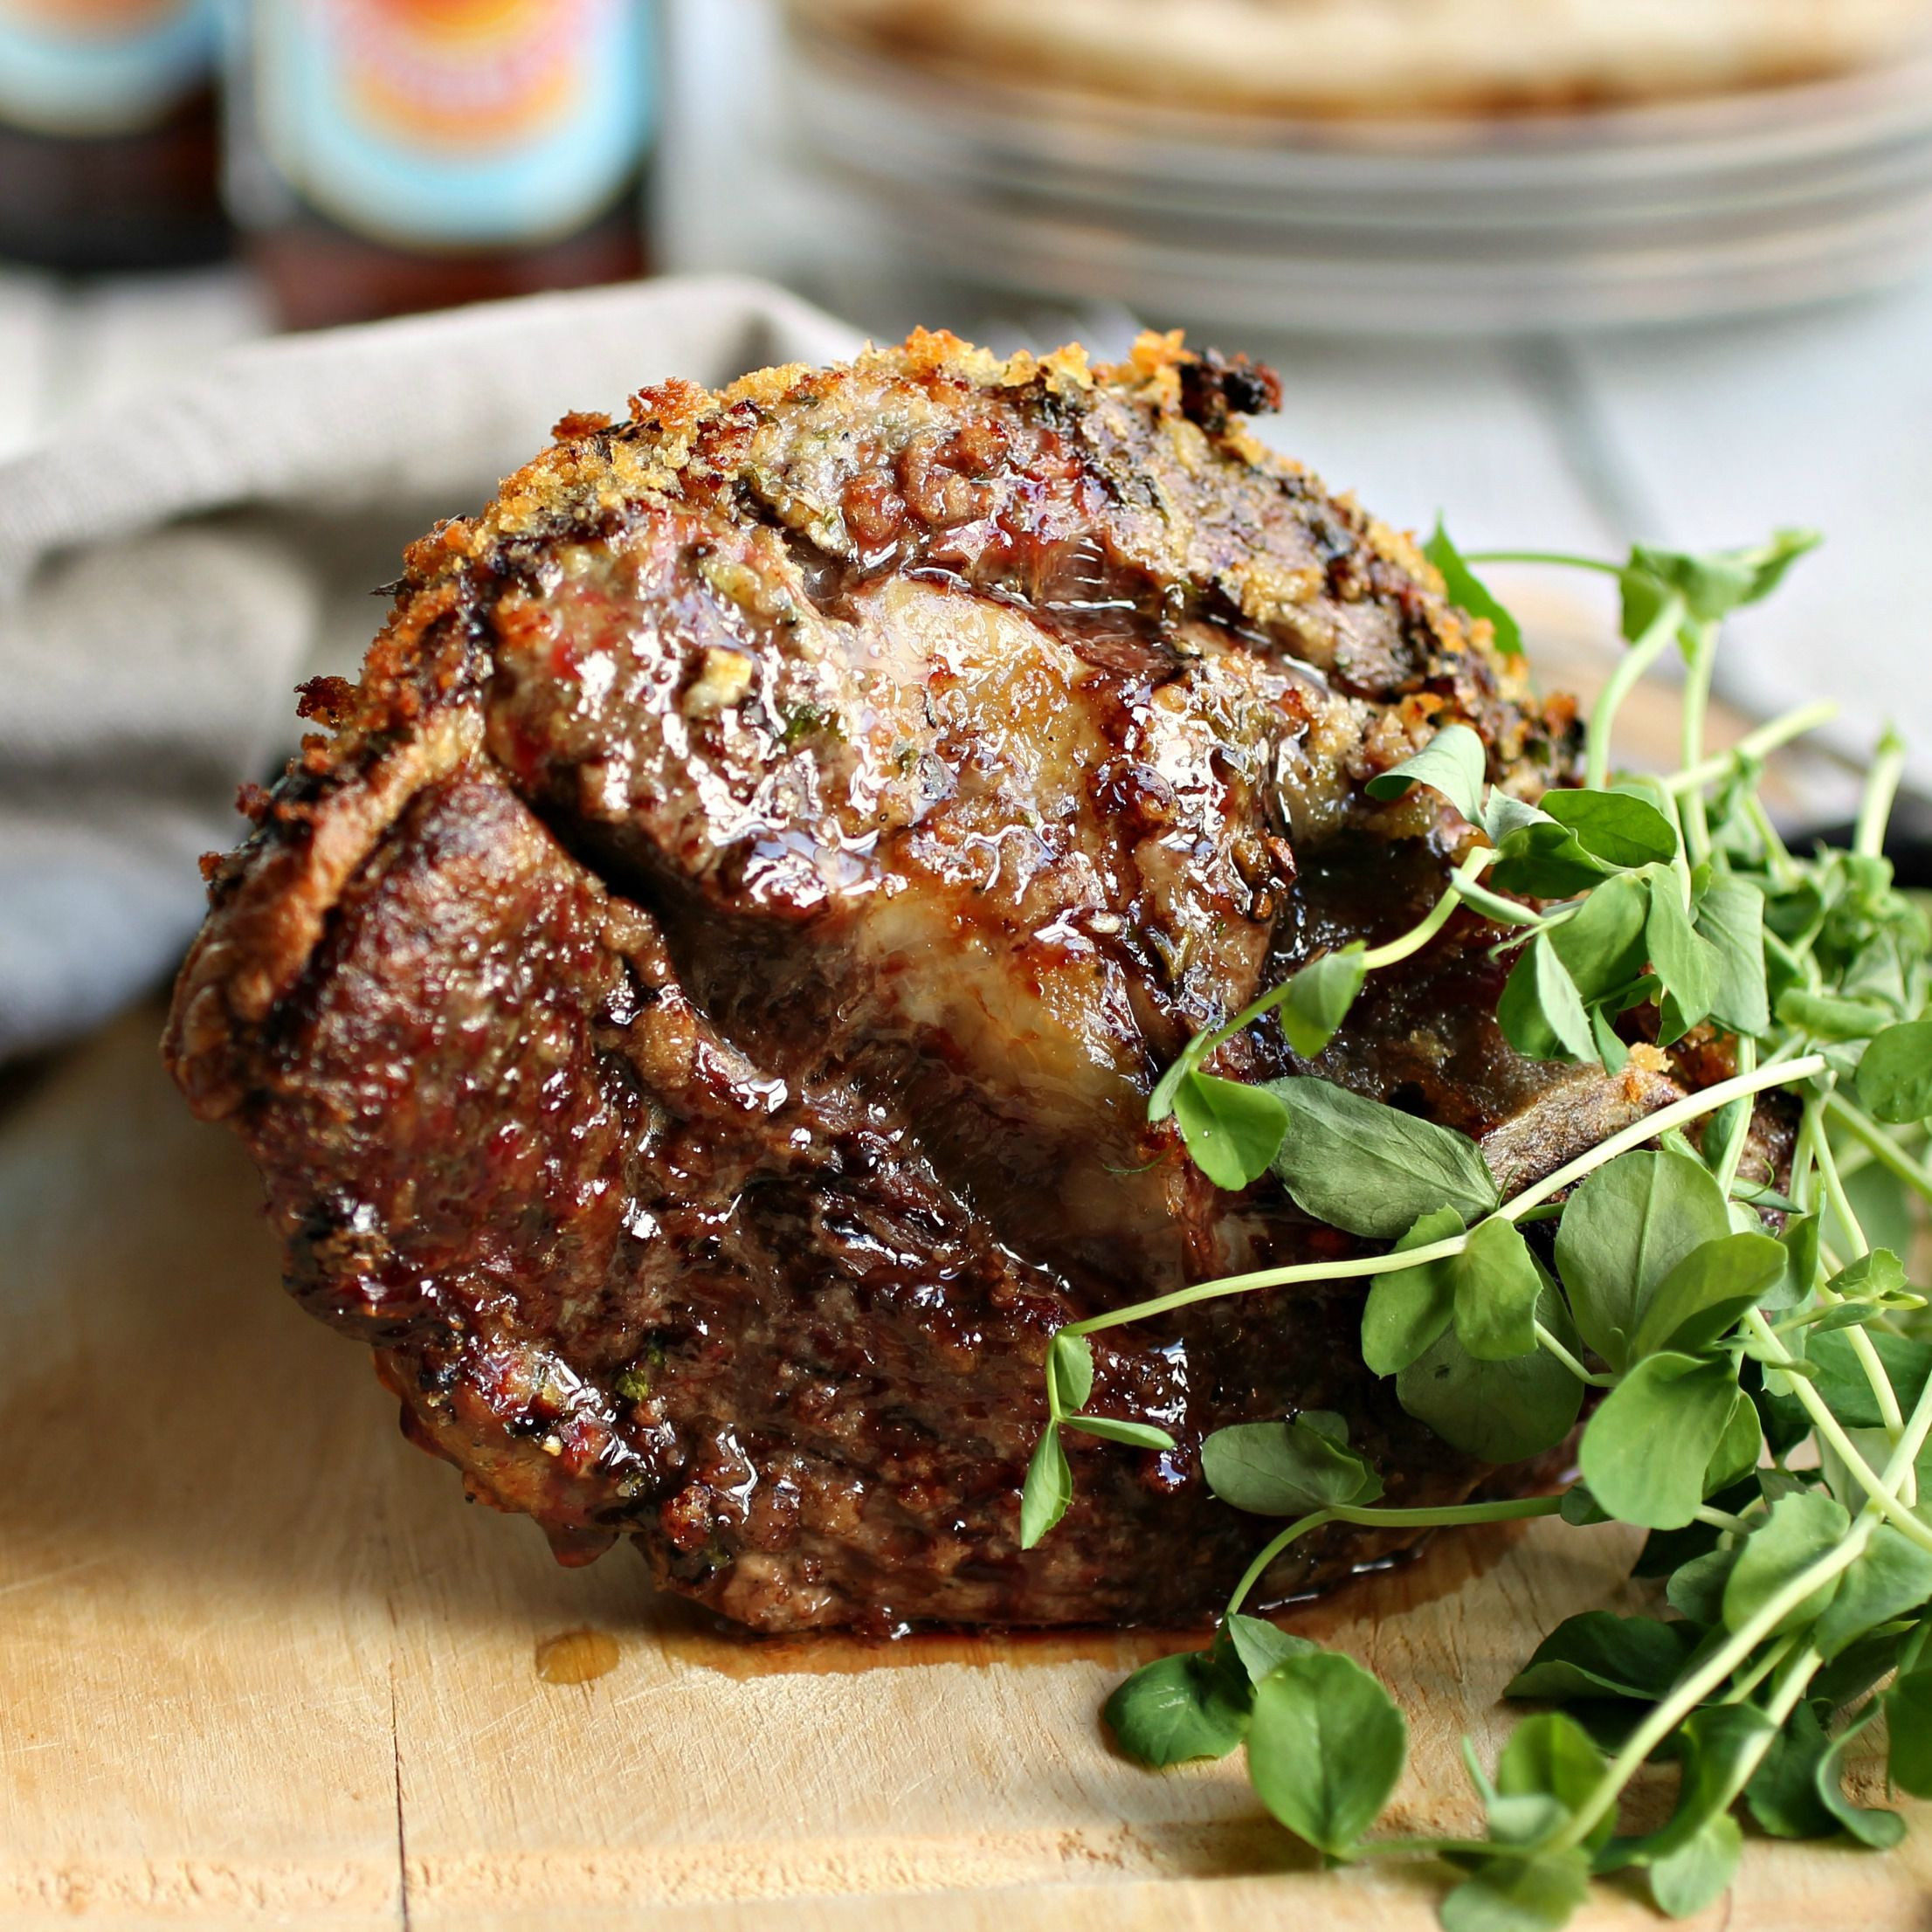 Passover Lamb Recipe
 Our Top 8 Lamb Recipes for Passover